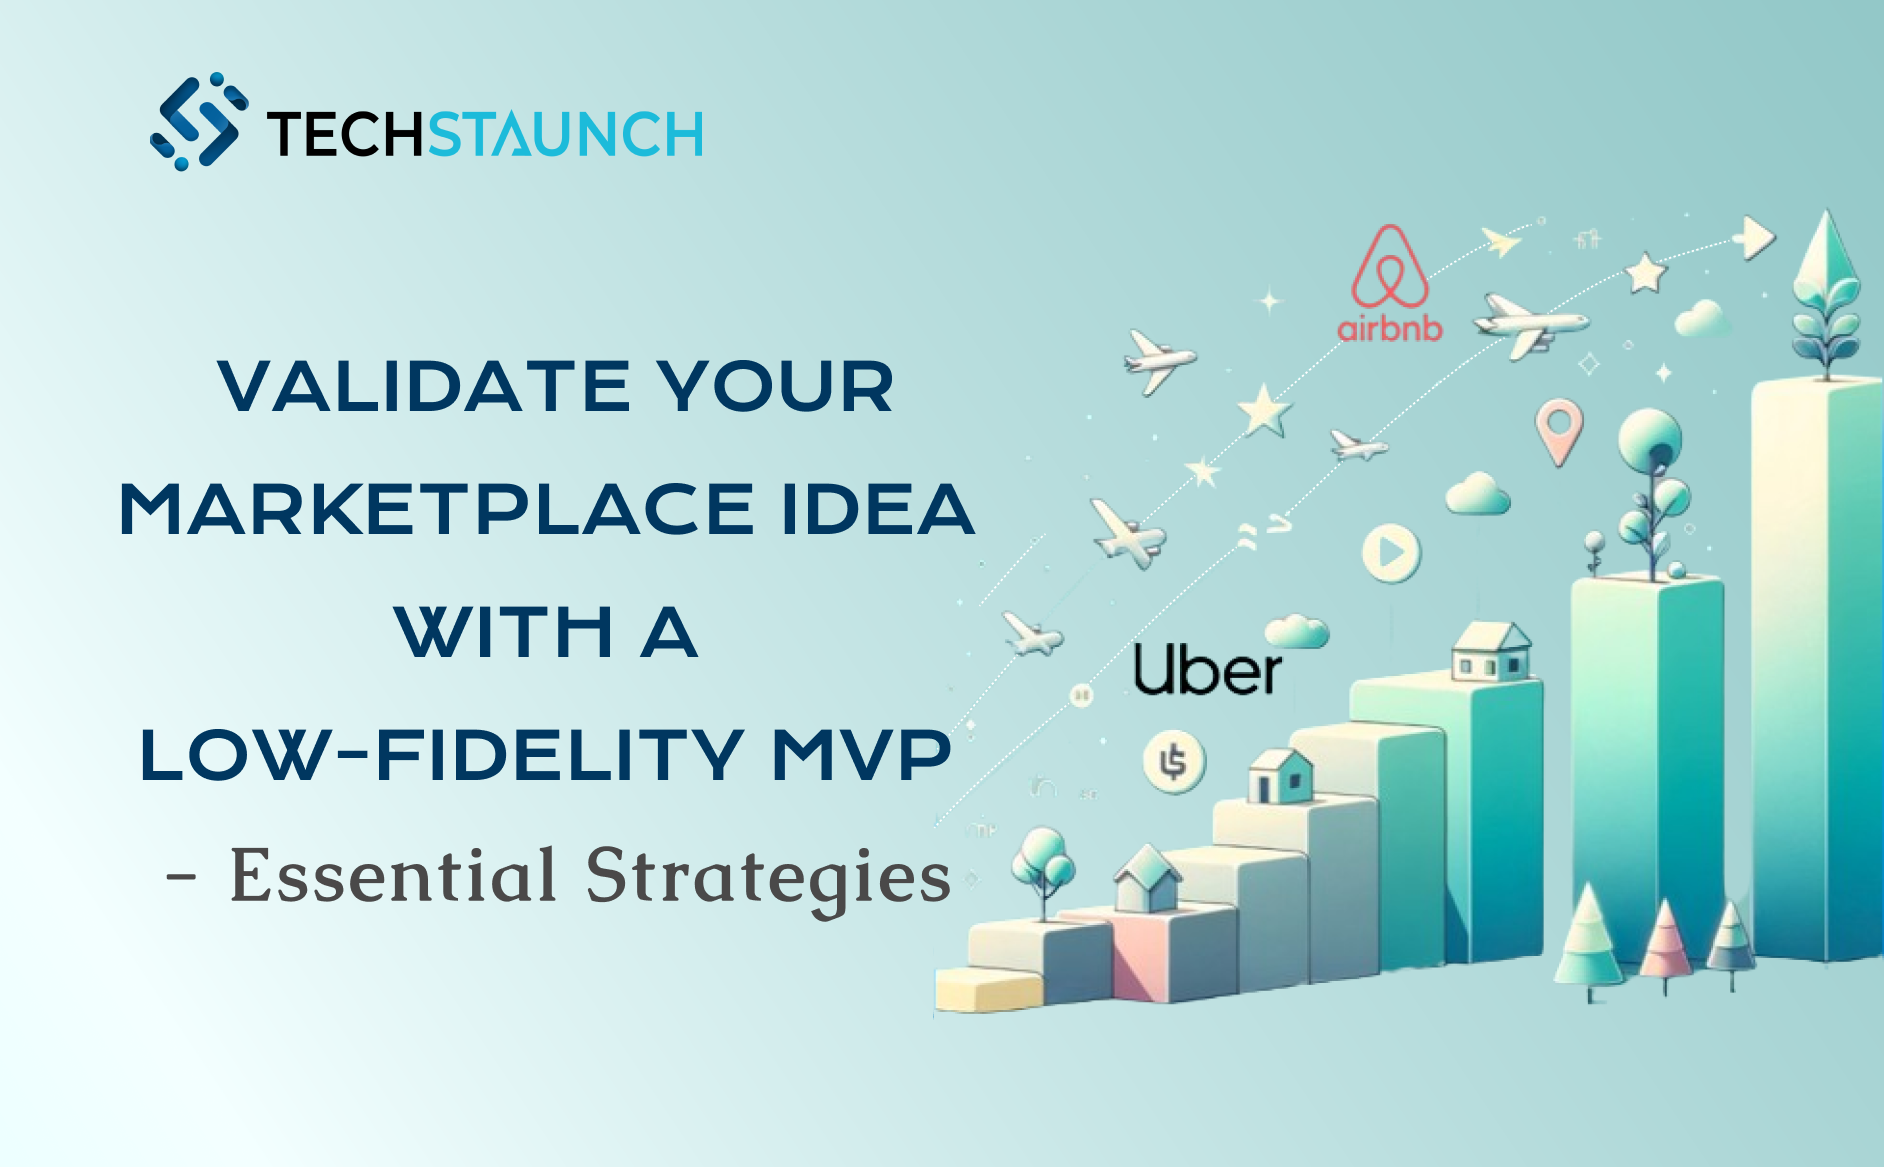 Validate Your Marketplace Idea with a Low-Fidelity MVP - Essential Strategies  